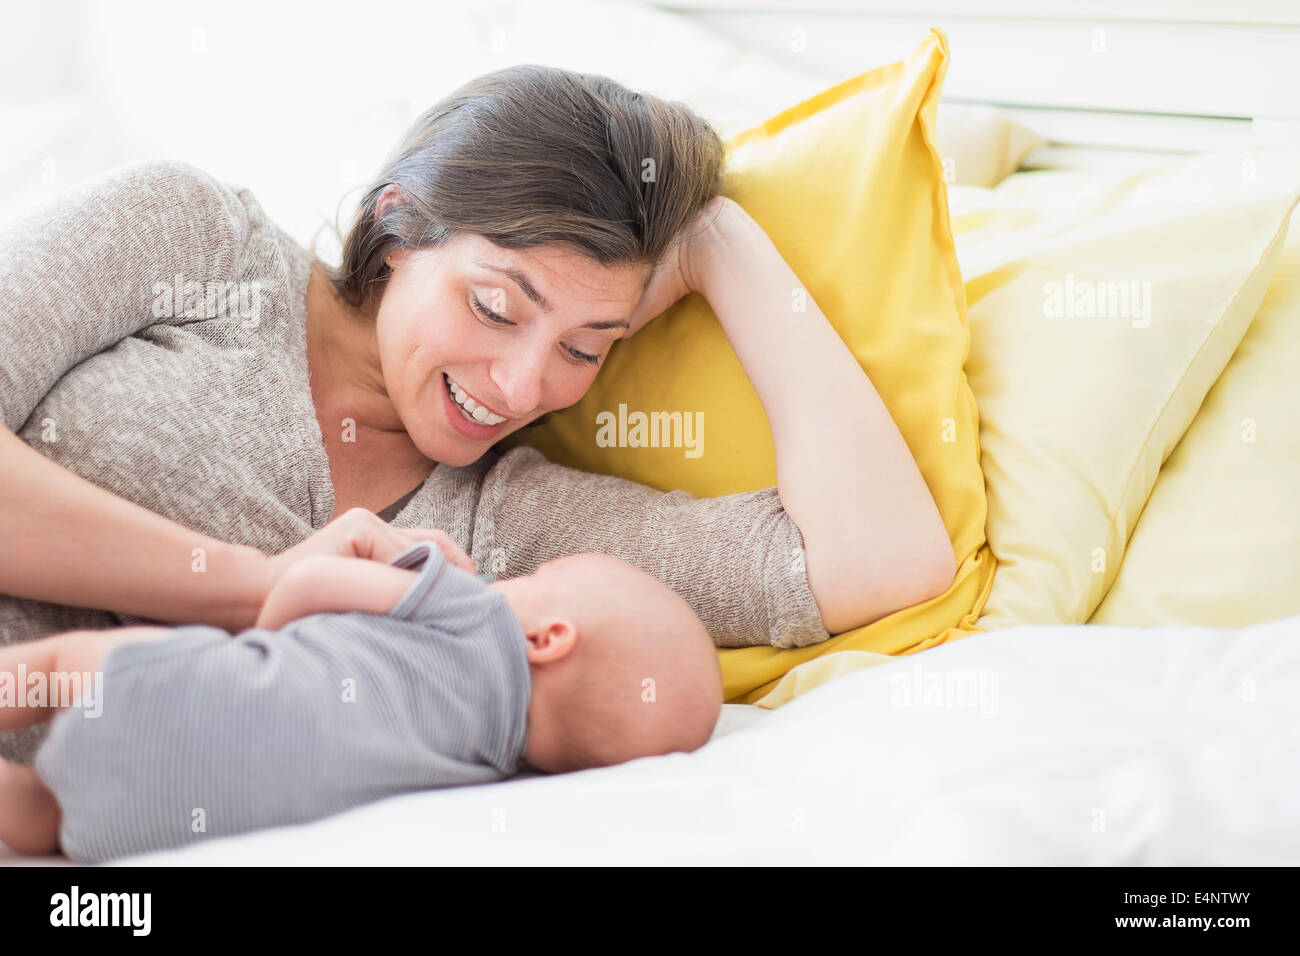 Mother with baby boy (2-5 months) lying on bed Stock Photo